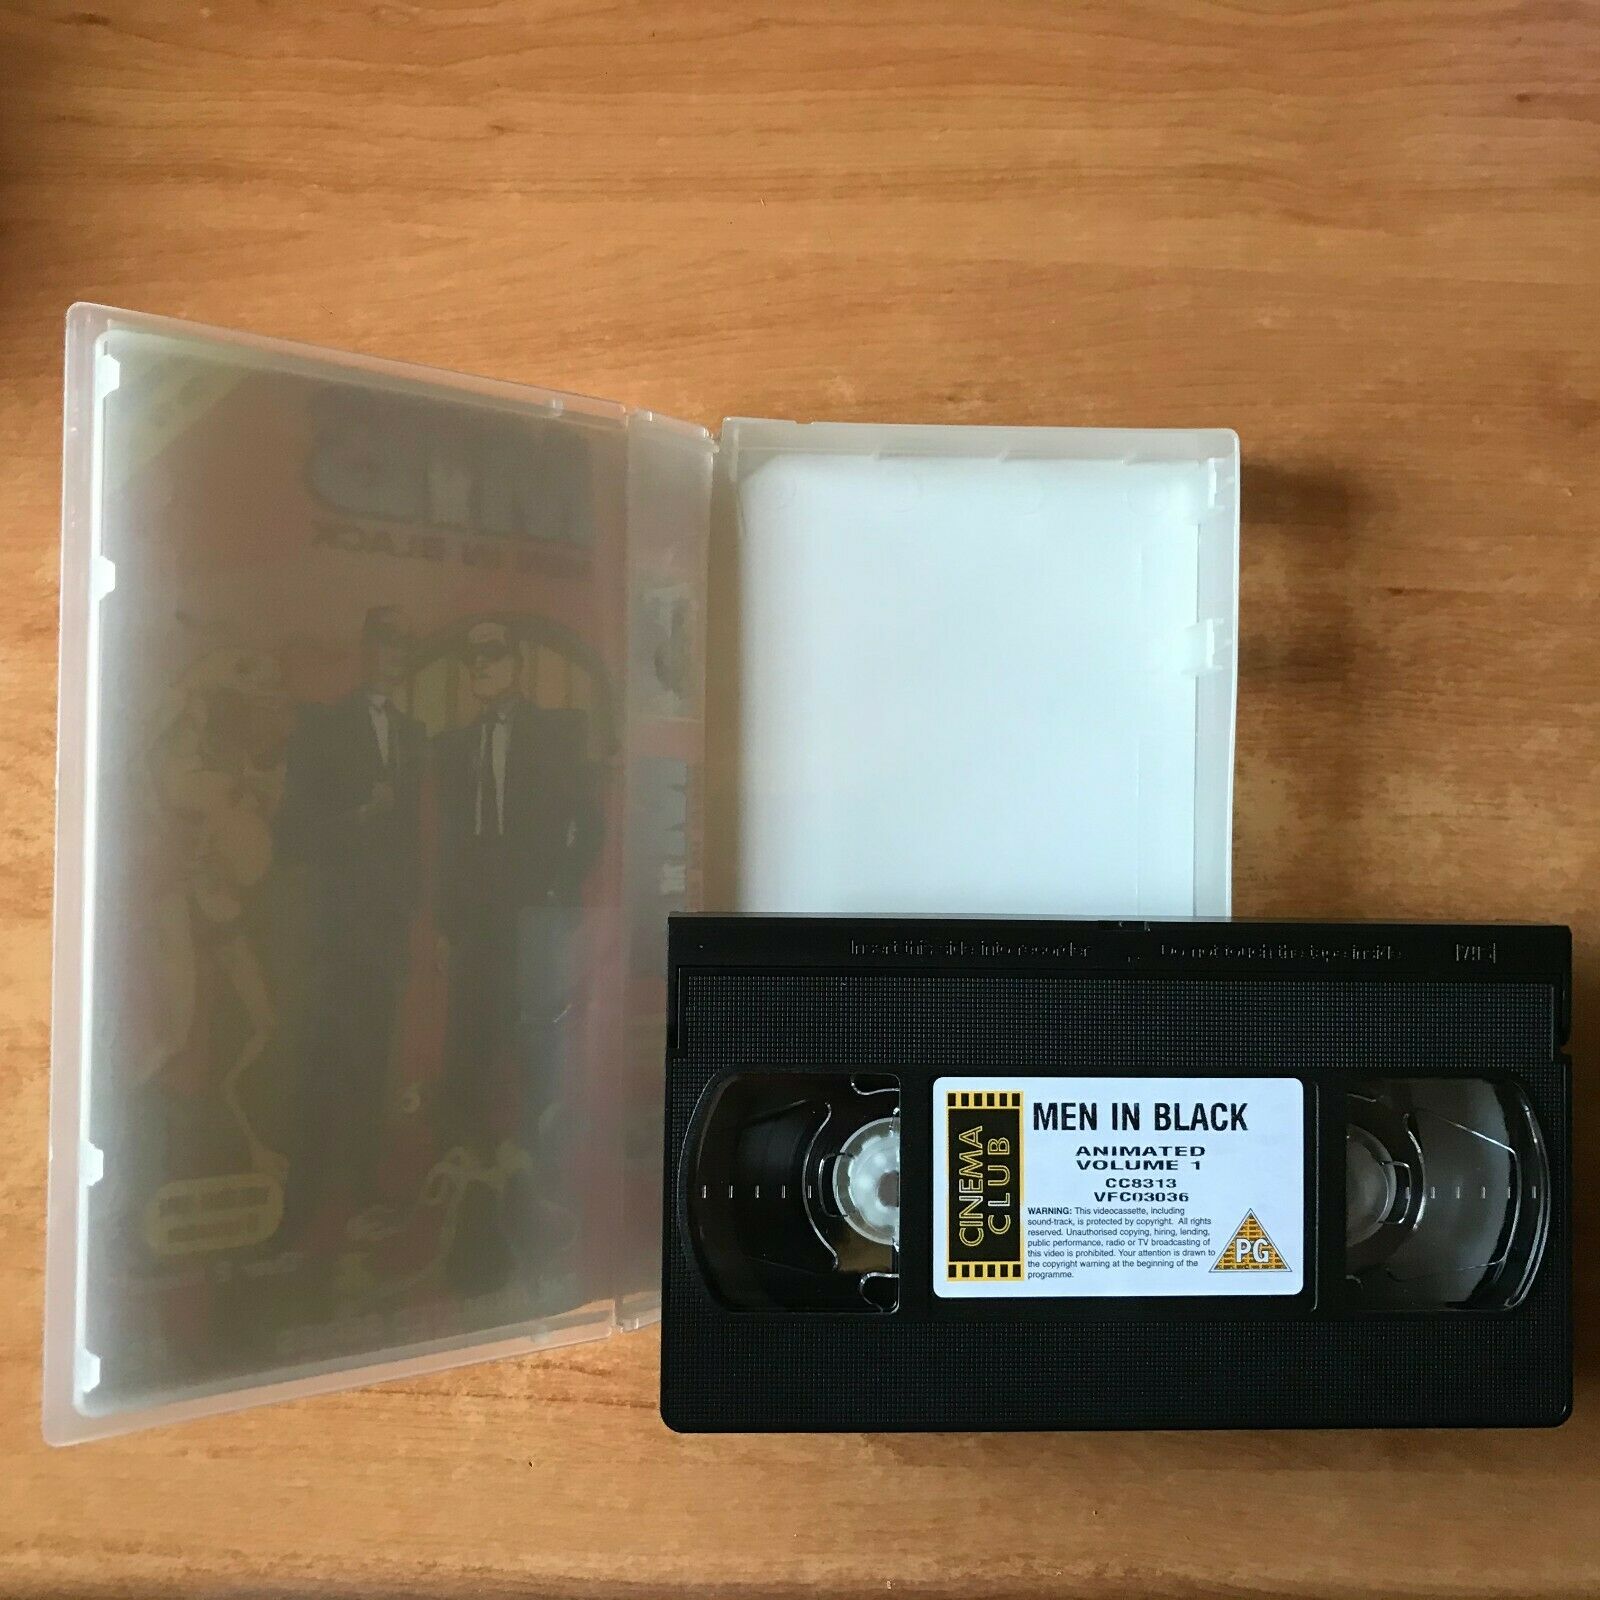 Men In Black: The Animated Series [Over 2 Hours] Animated - Children's - Pal VHS-